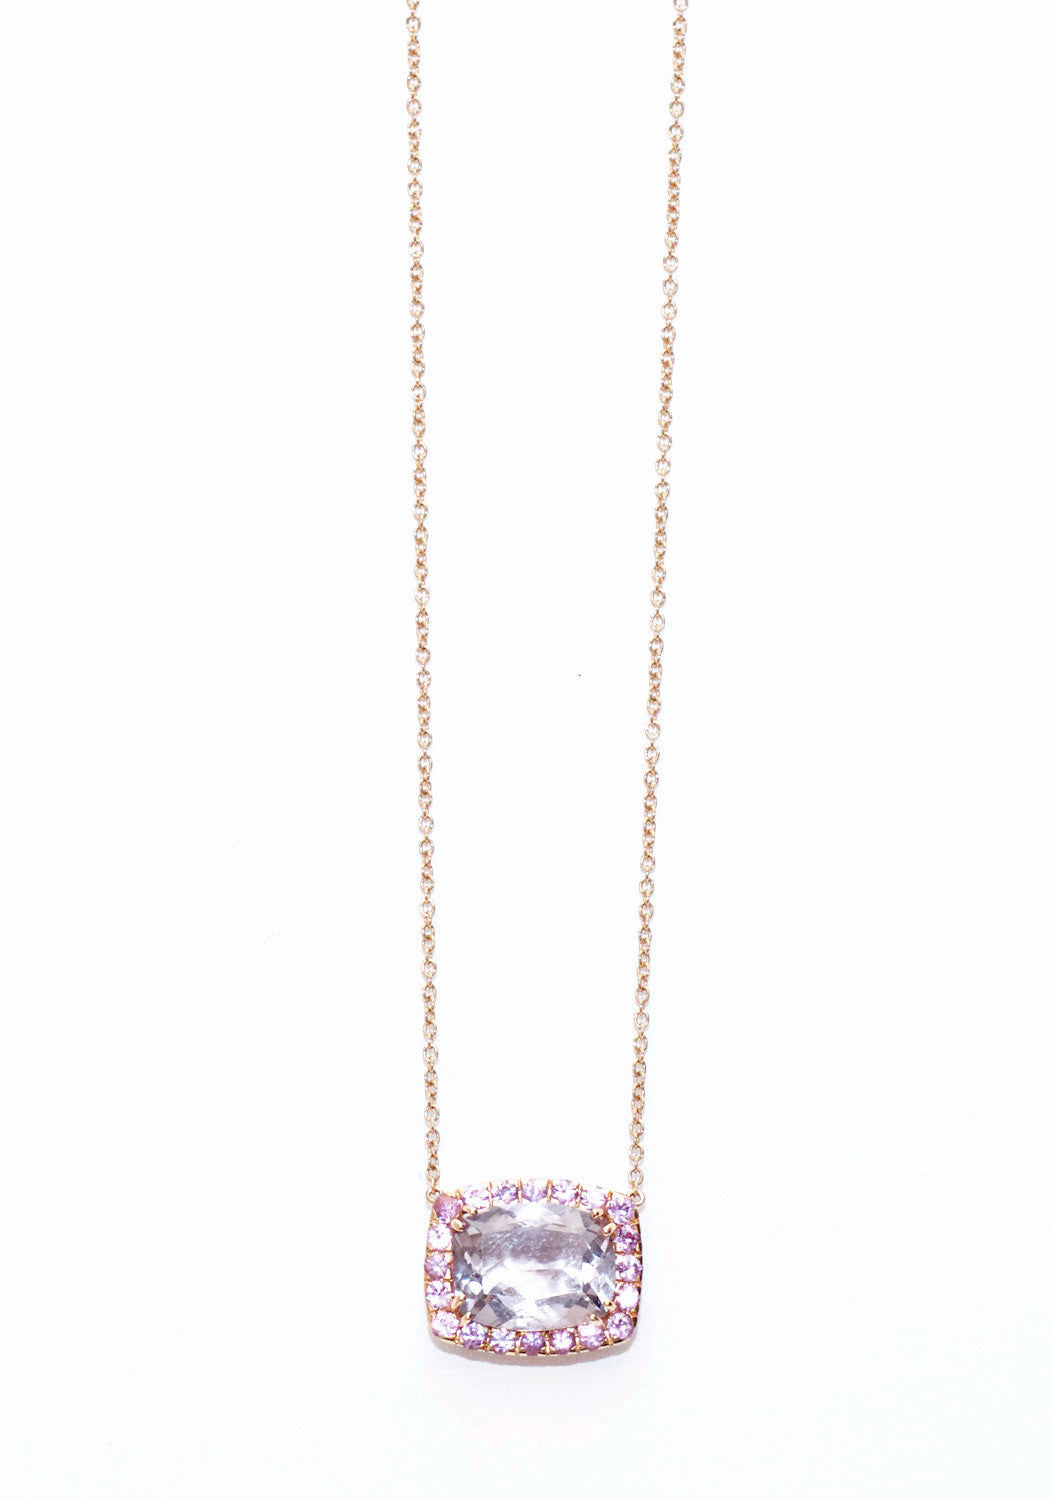 A & Furst 5.00ct Rose De France & Sapphire Necklace E1341RRF4R | Oster Jewelers